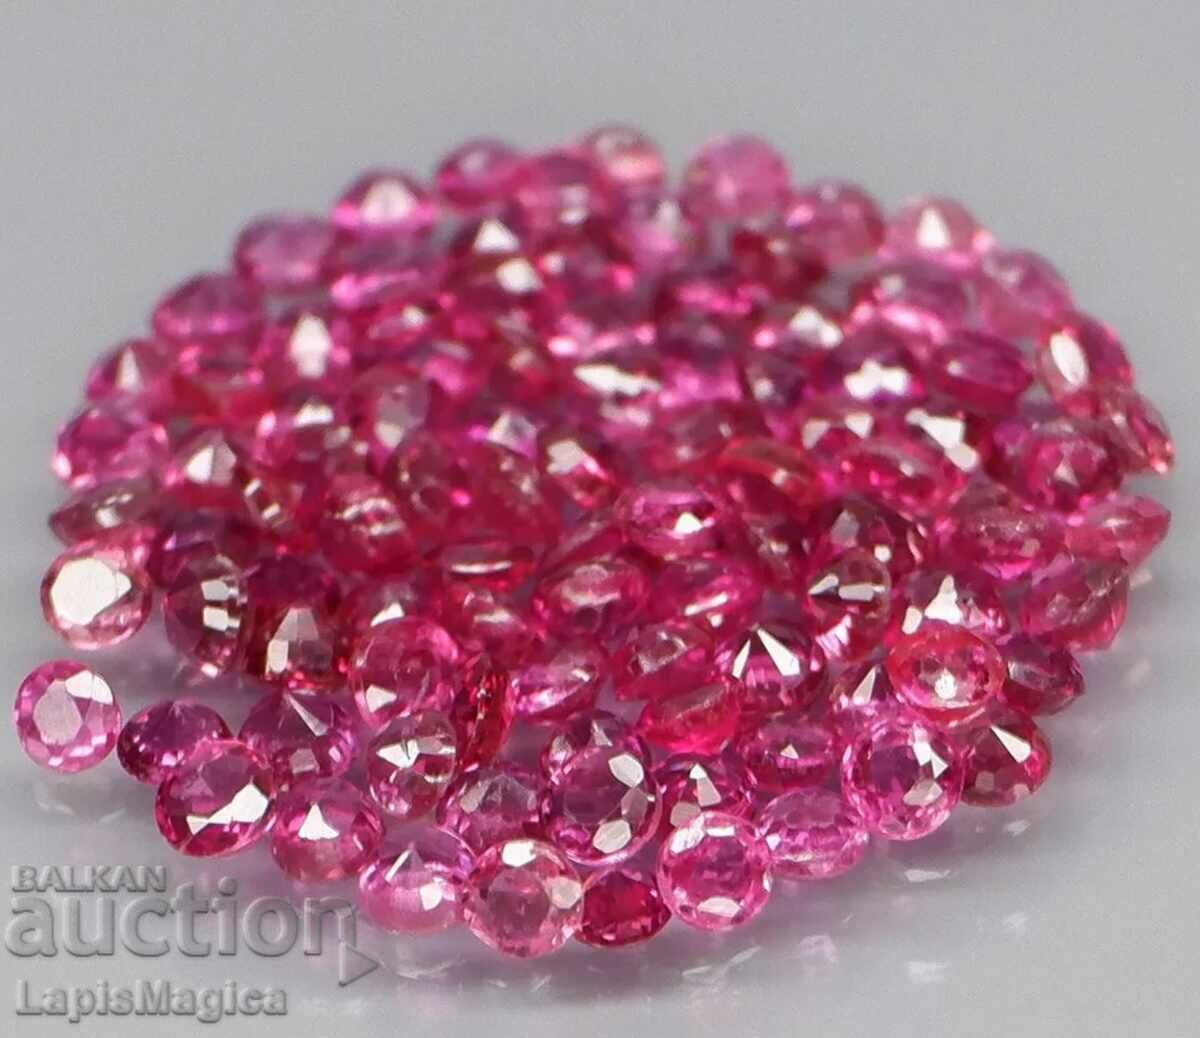 Rubies 1.4-1.8mm round cut - price for 20 pieces